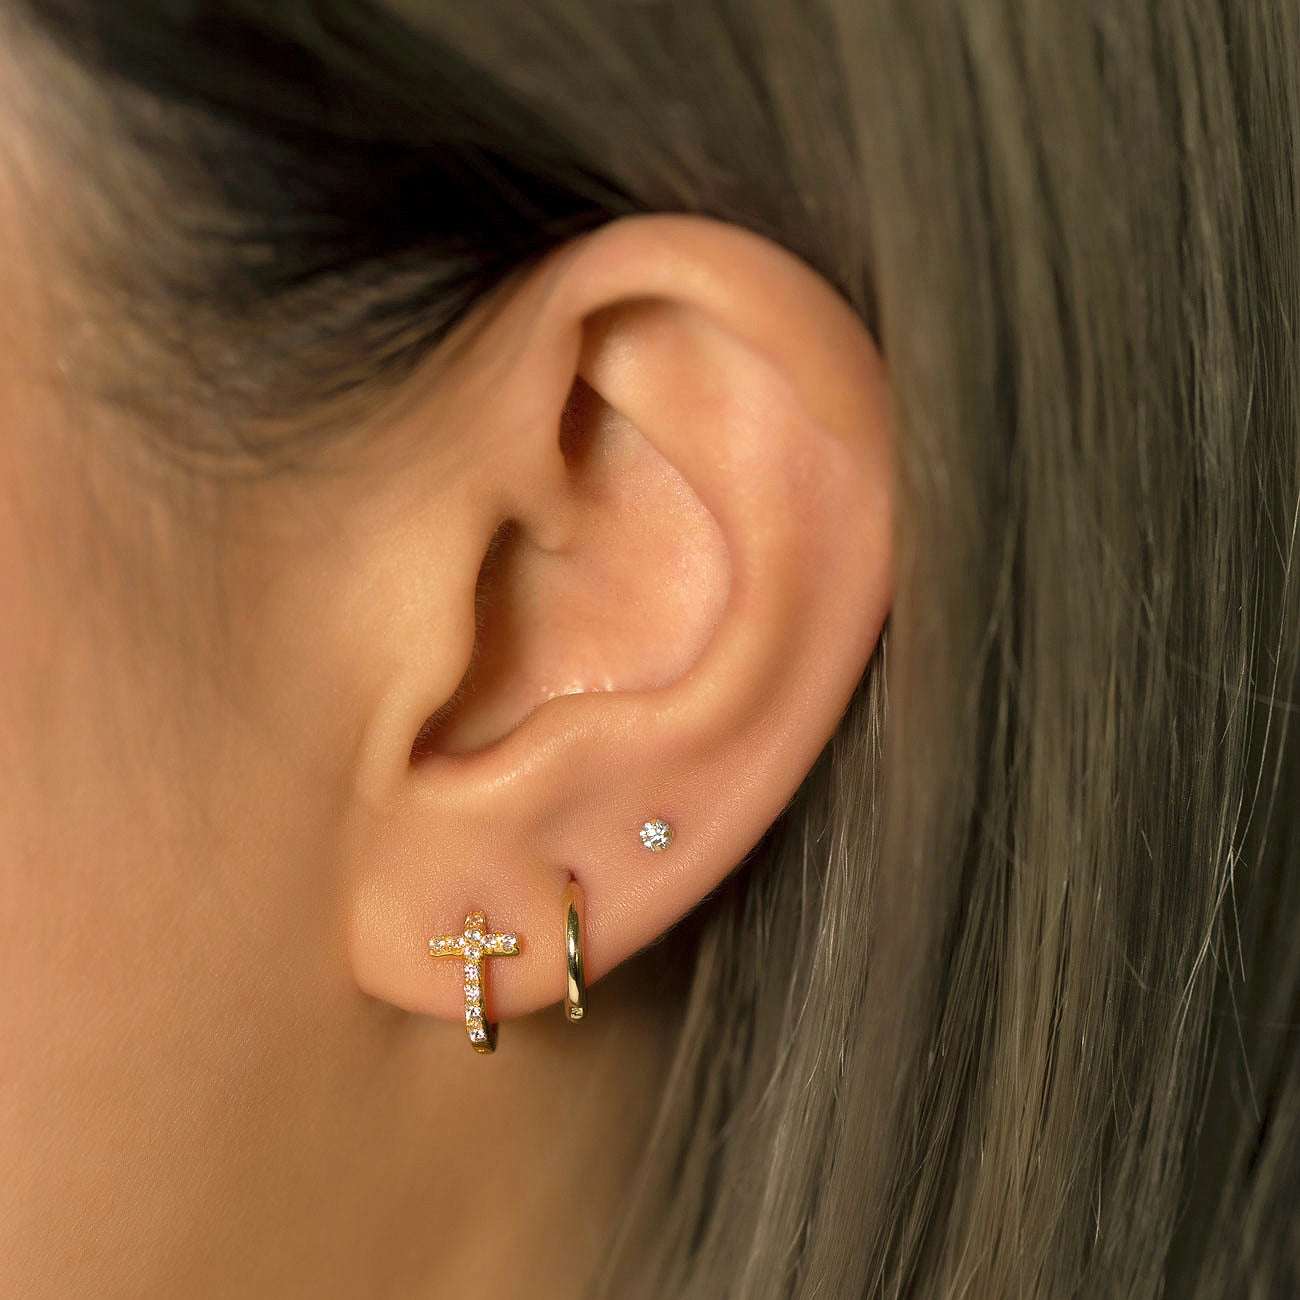 caption:Model's second hole:4.8mm, wearing 6mm